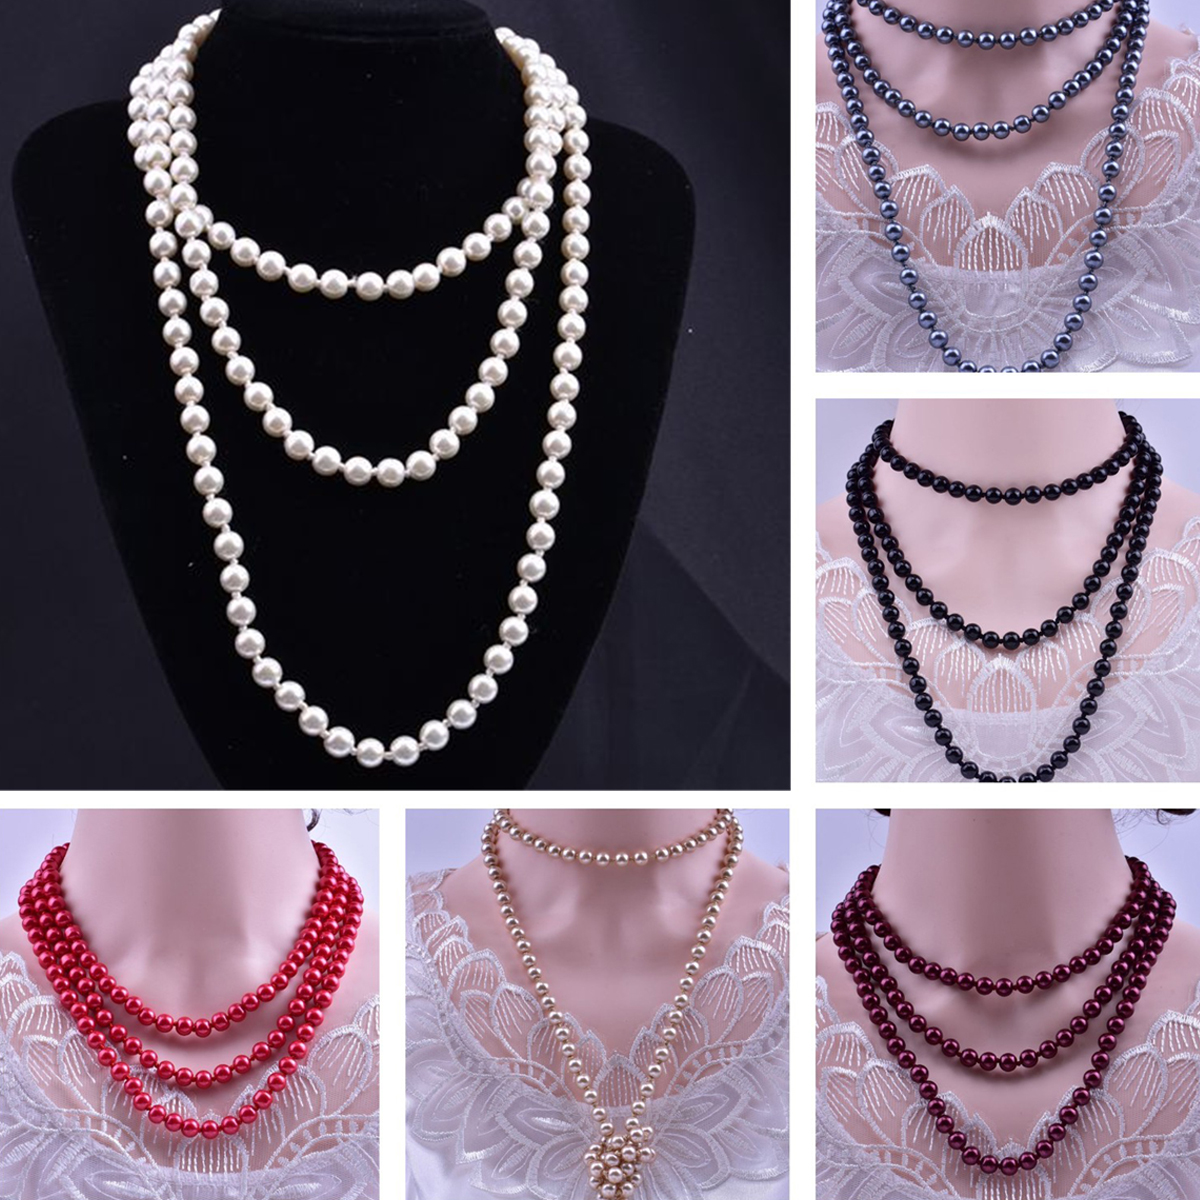 Meidiya 150cm Fashion Knot Simulated Pearl Necklace Tassel Multi-layer Long Chain Necklace Female Fashion Sweater Dress Accessories - image 1 of 8